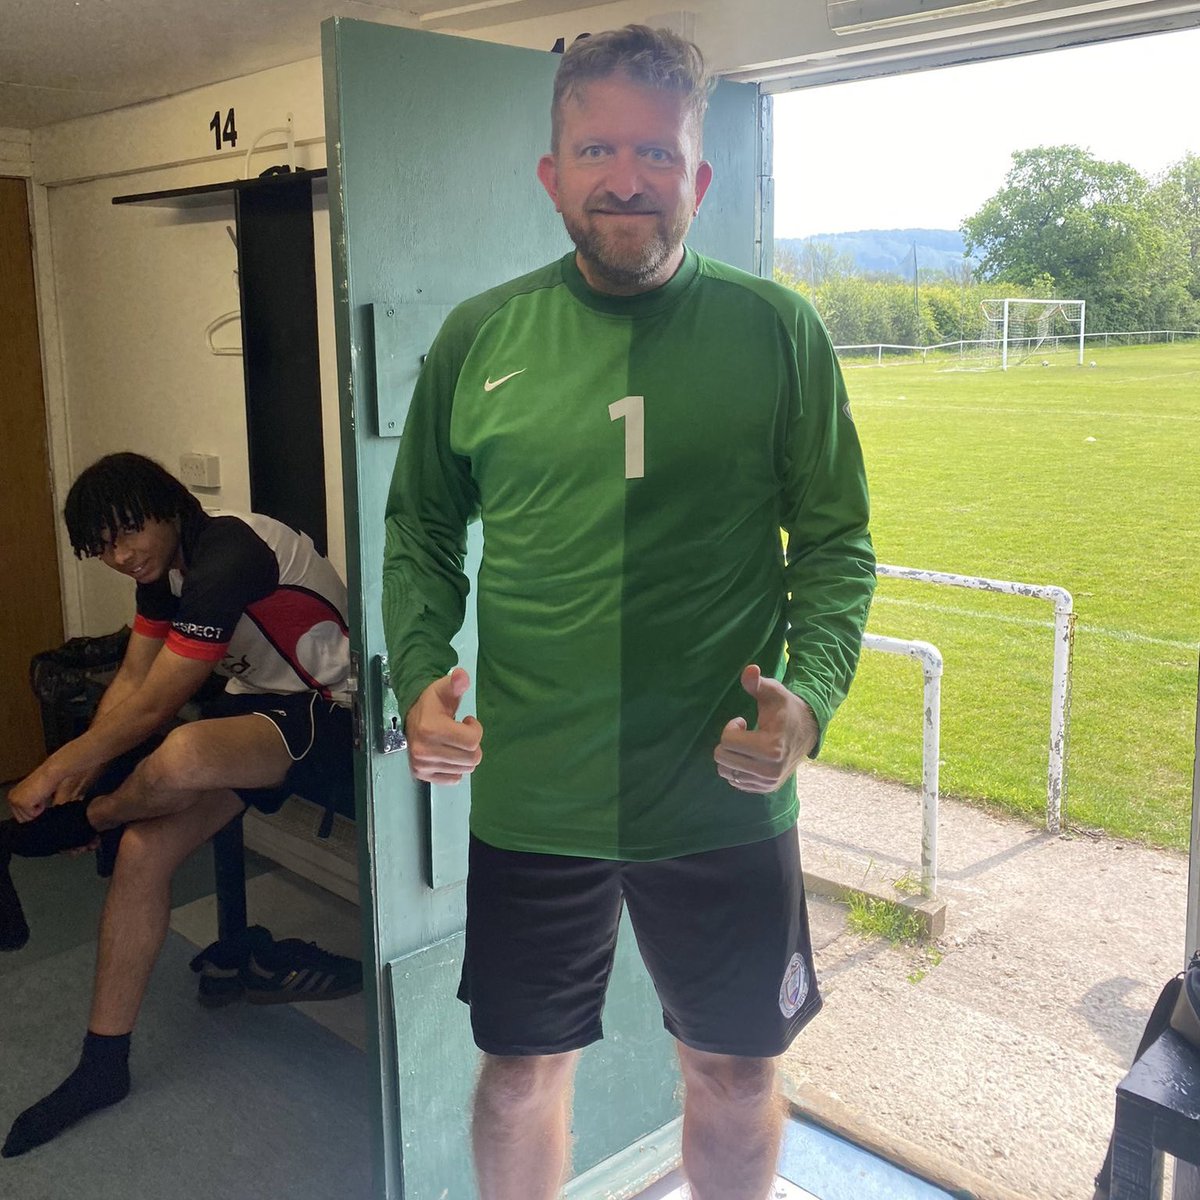 Victory for the Thirds this afternoon! Goalless at half-time, goals from Sam Rees and Ben Treloar secured the win. A clean sheet for stand-in keeper/manager, Rich ‘the cat’ Hobbs, and a busy afternoon for midfield general James Hughes. #uptheposset ⚪️⚫️ @swsportsnews